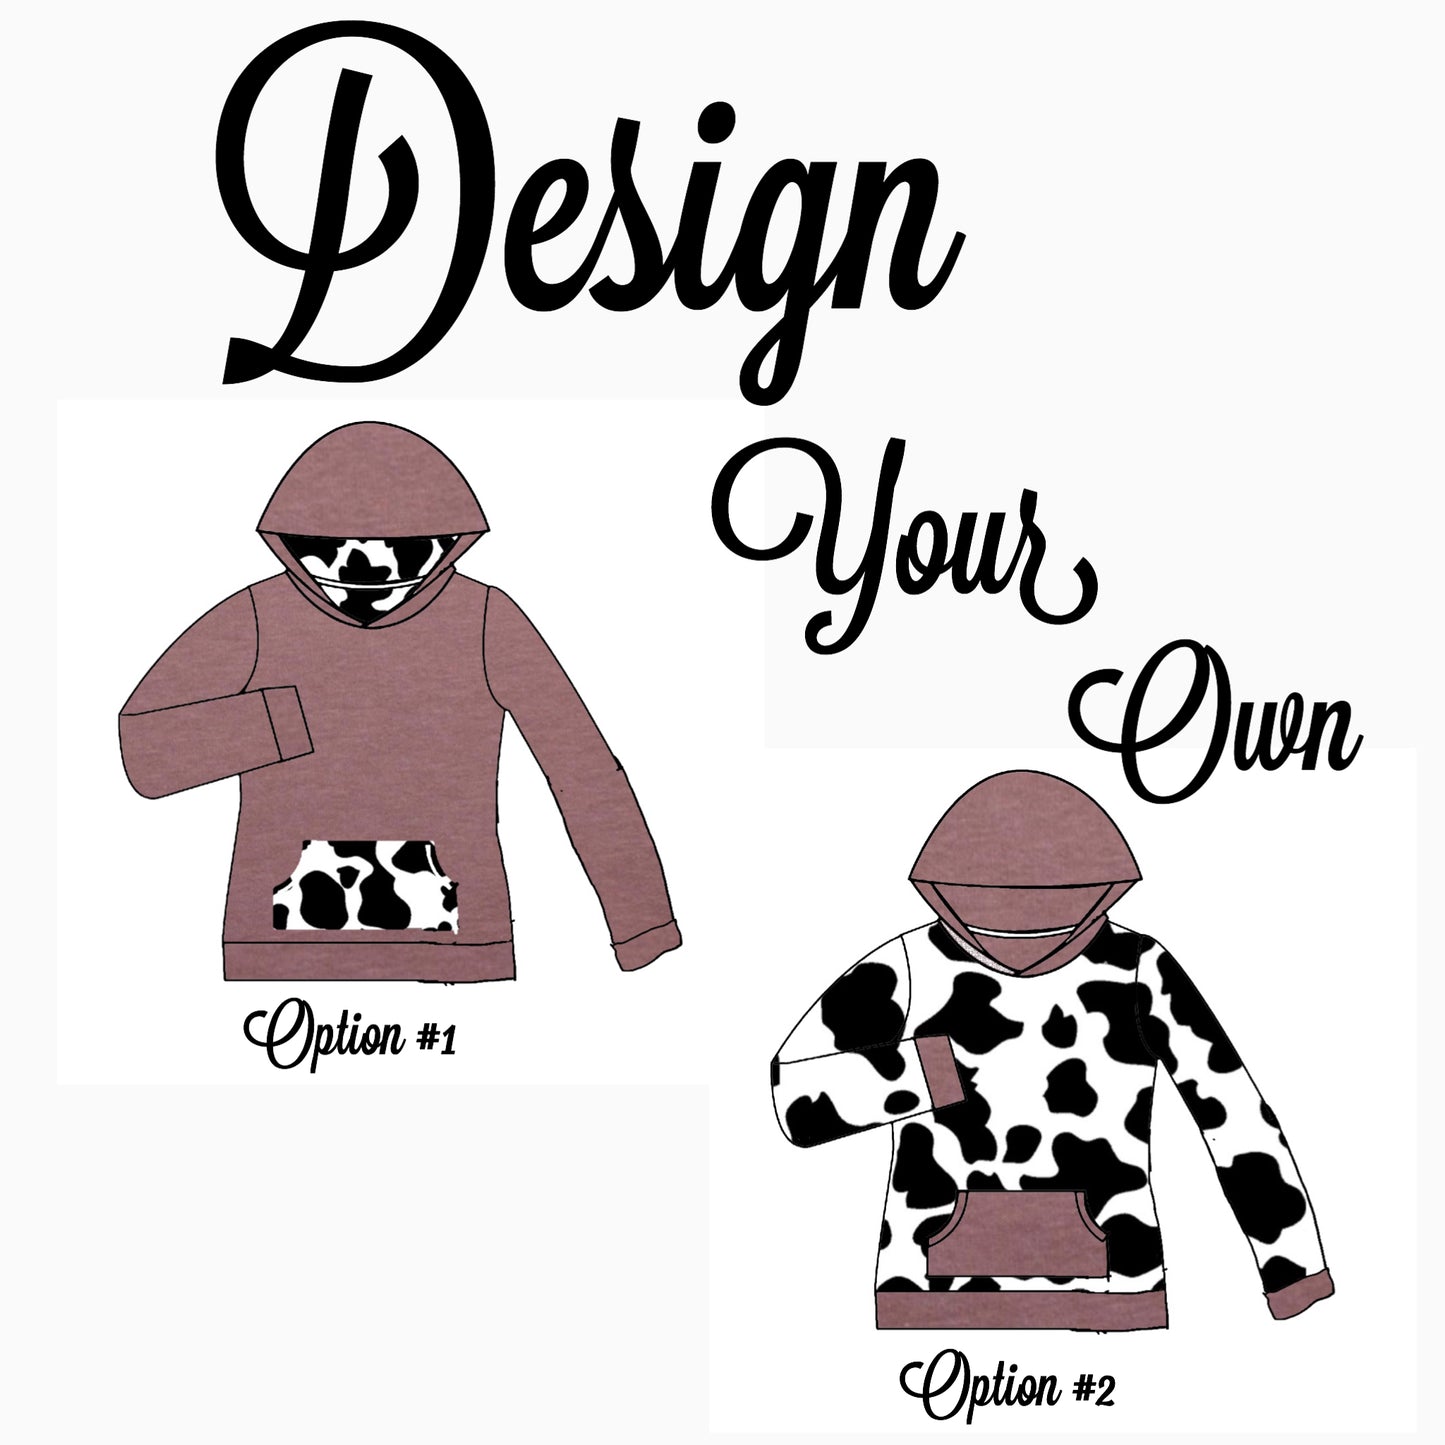 Design Your Own | Hoodie